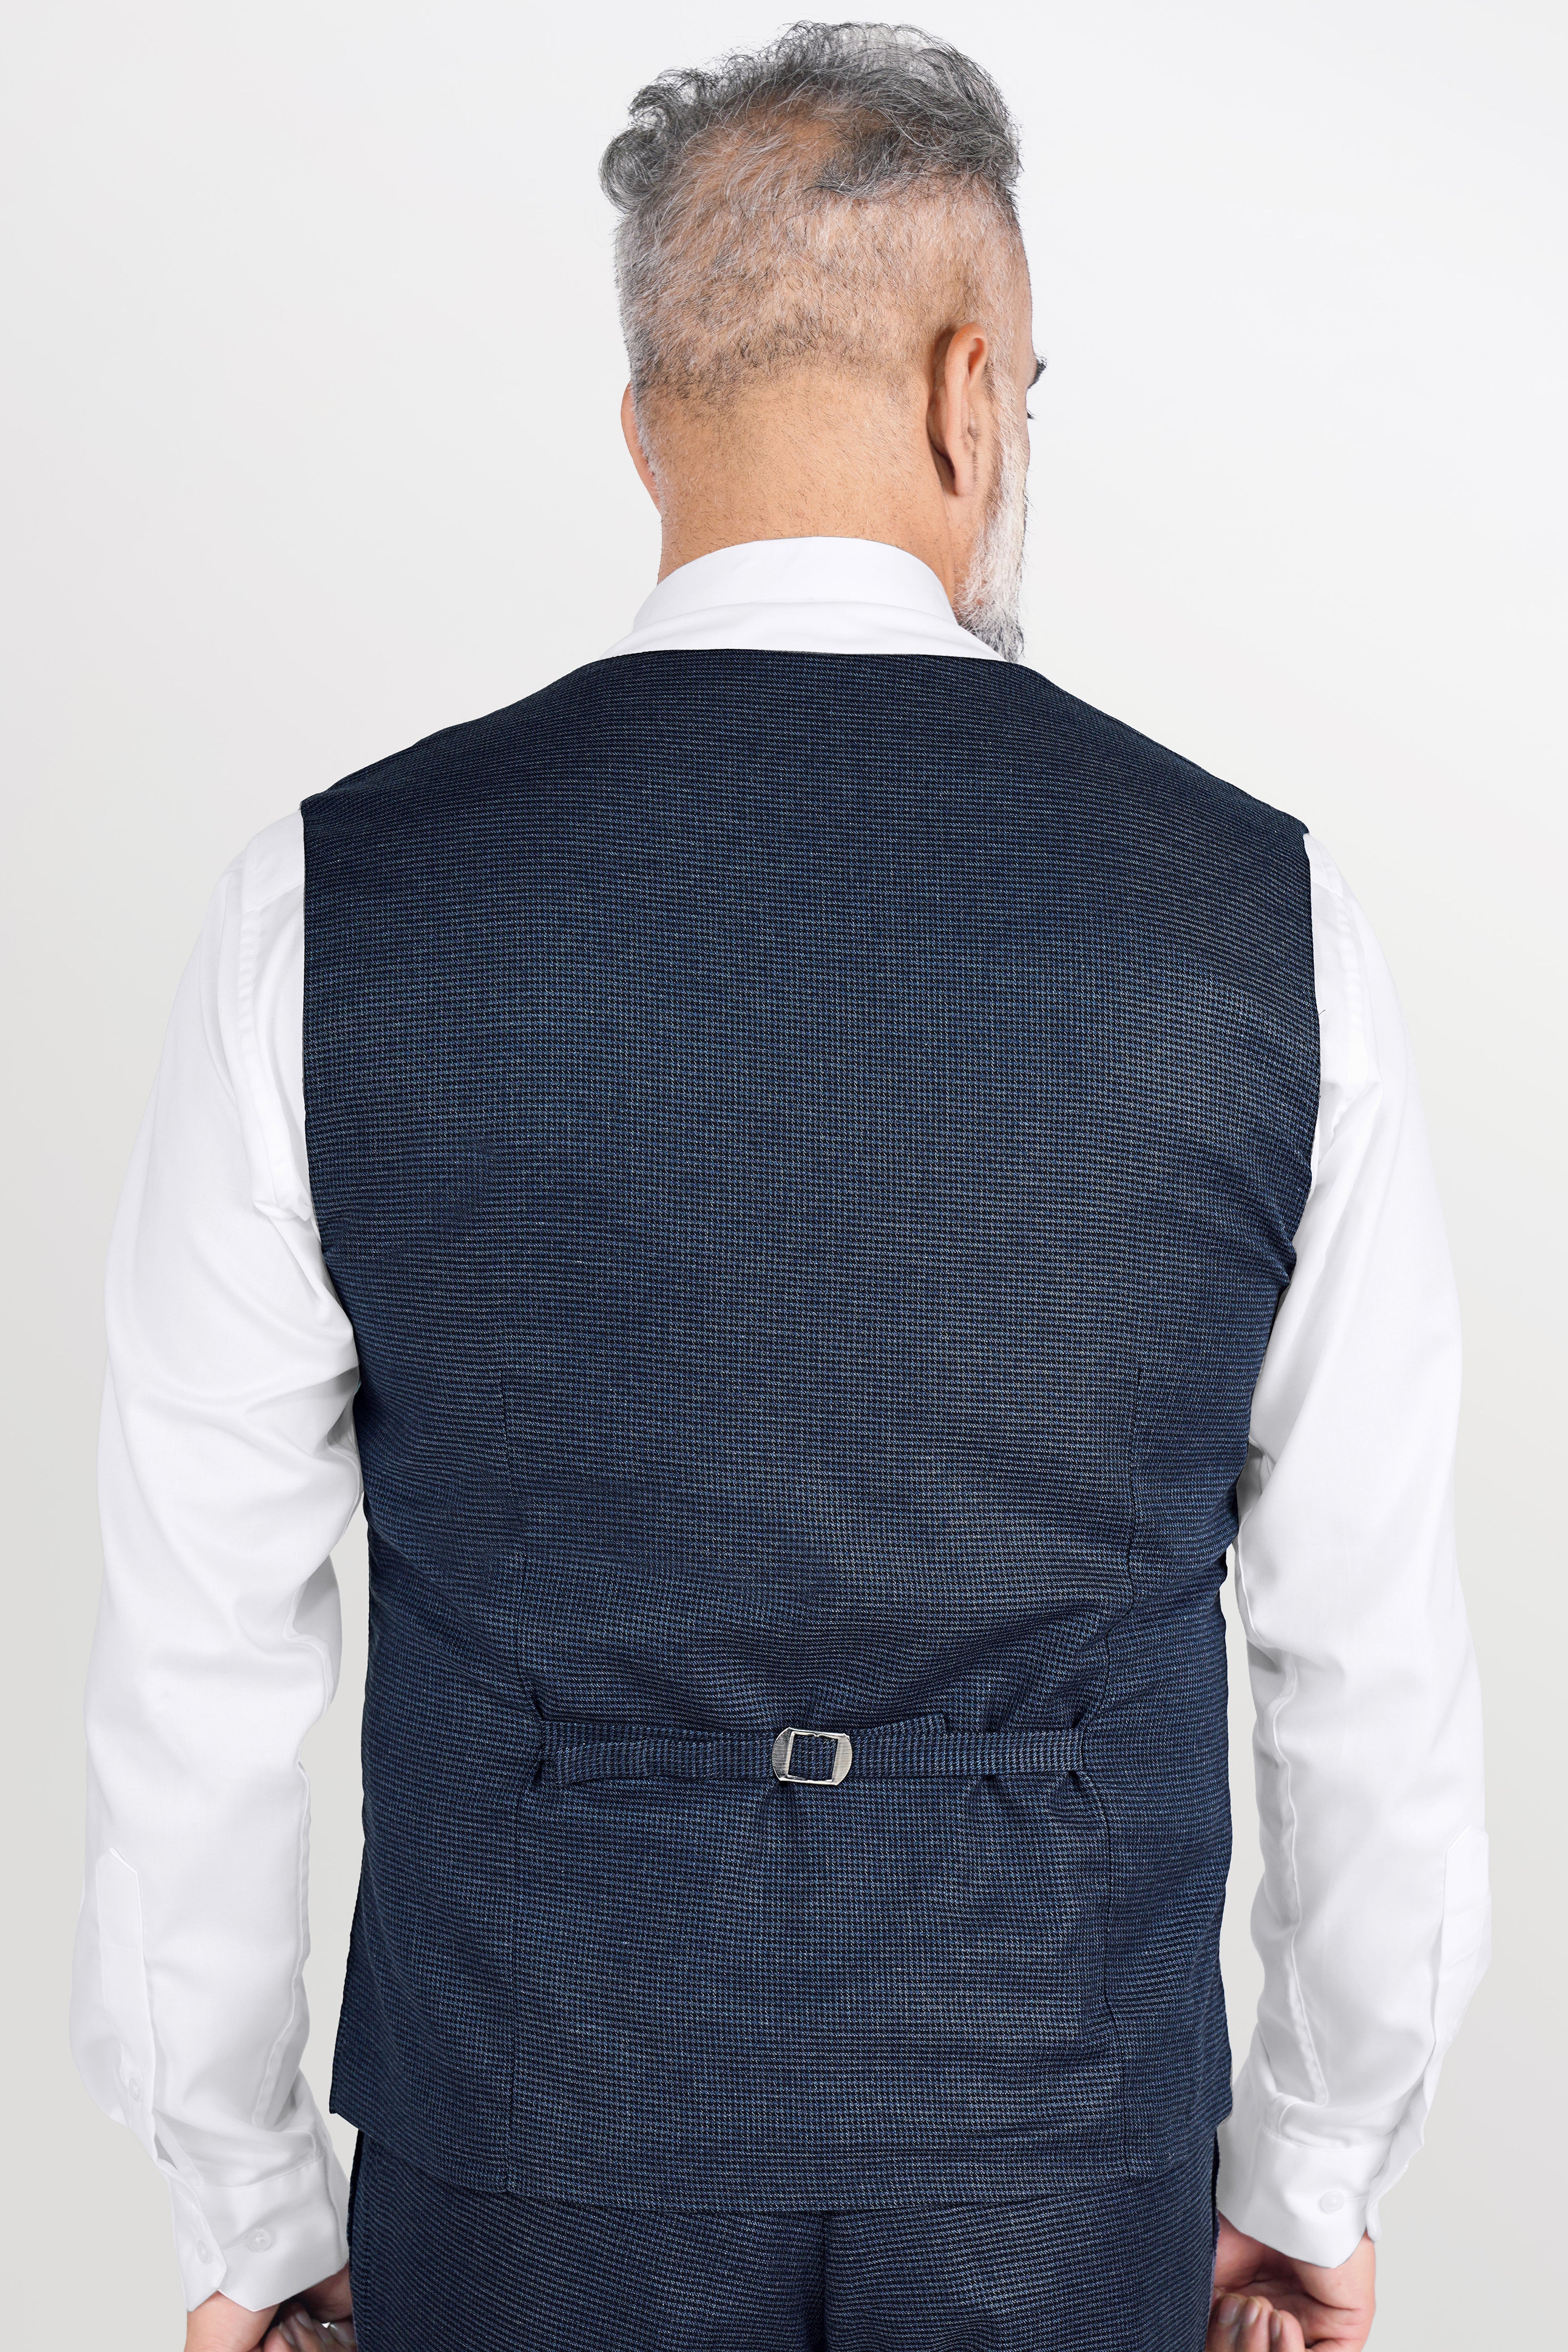 Limed Spruce Blue Wool Rich Waistcoat With Houndstooth Pattern V2824-36, V2824-38, V2824-40, V2824-42, V2824-44, V2824-46, V2824-48, V2824-50, V2824-52, V2824-54, V2824-56, V2824-58, V2824-60